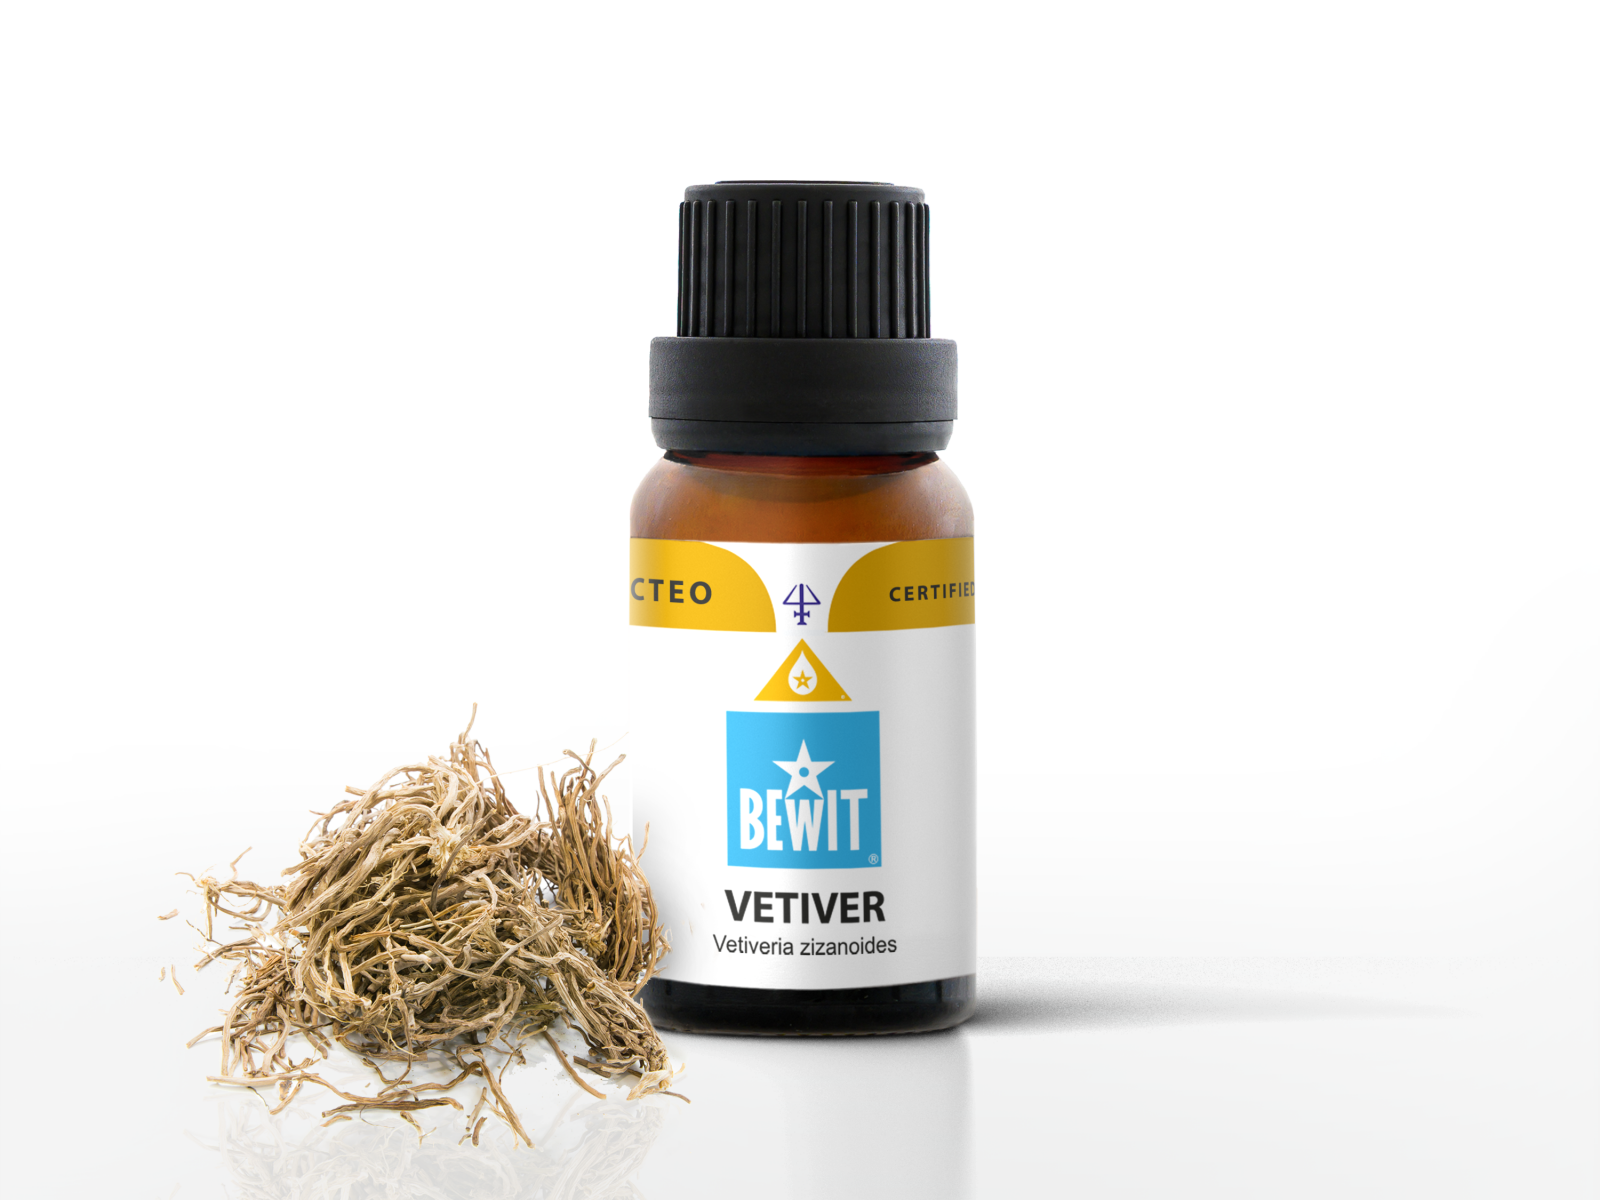 BEWIT Vetiver - 100% pure essential oil - 1